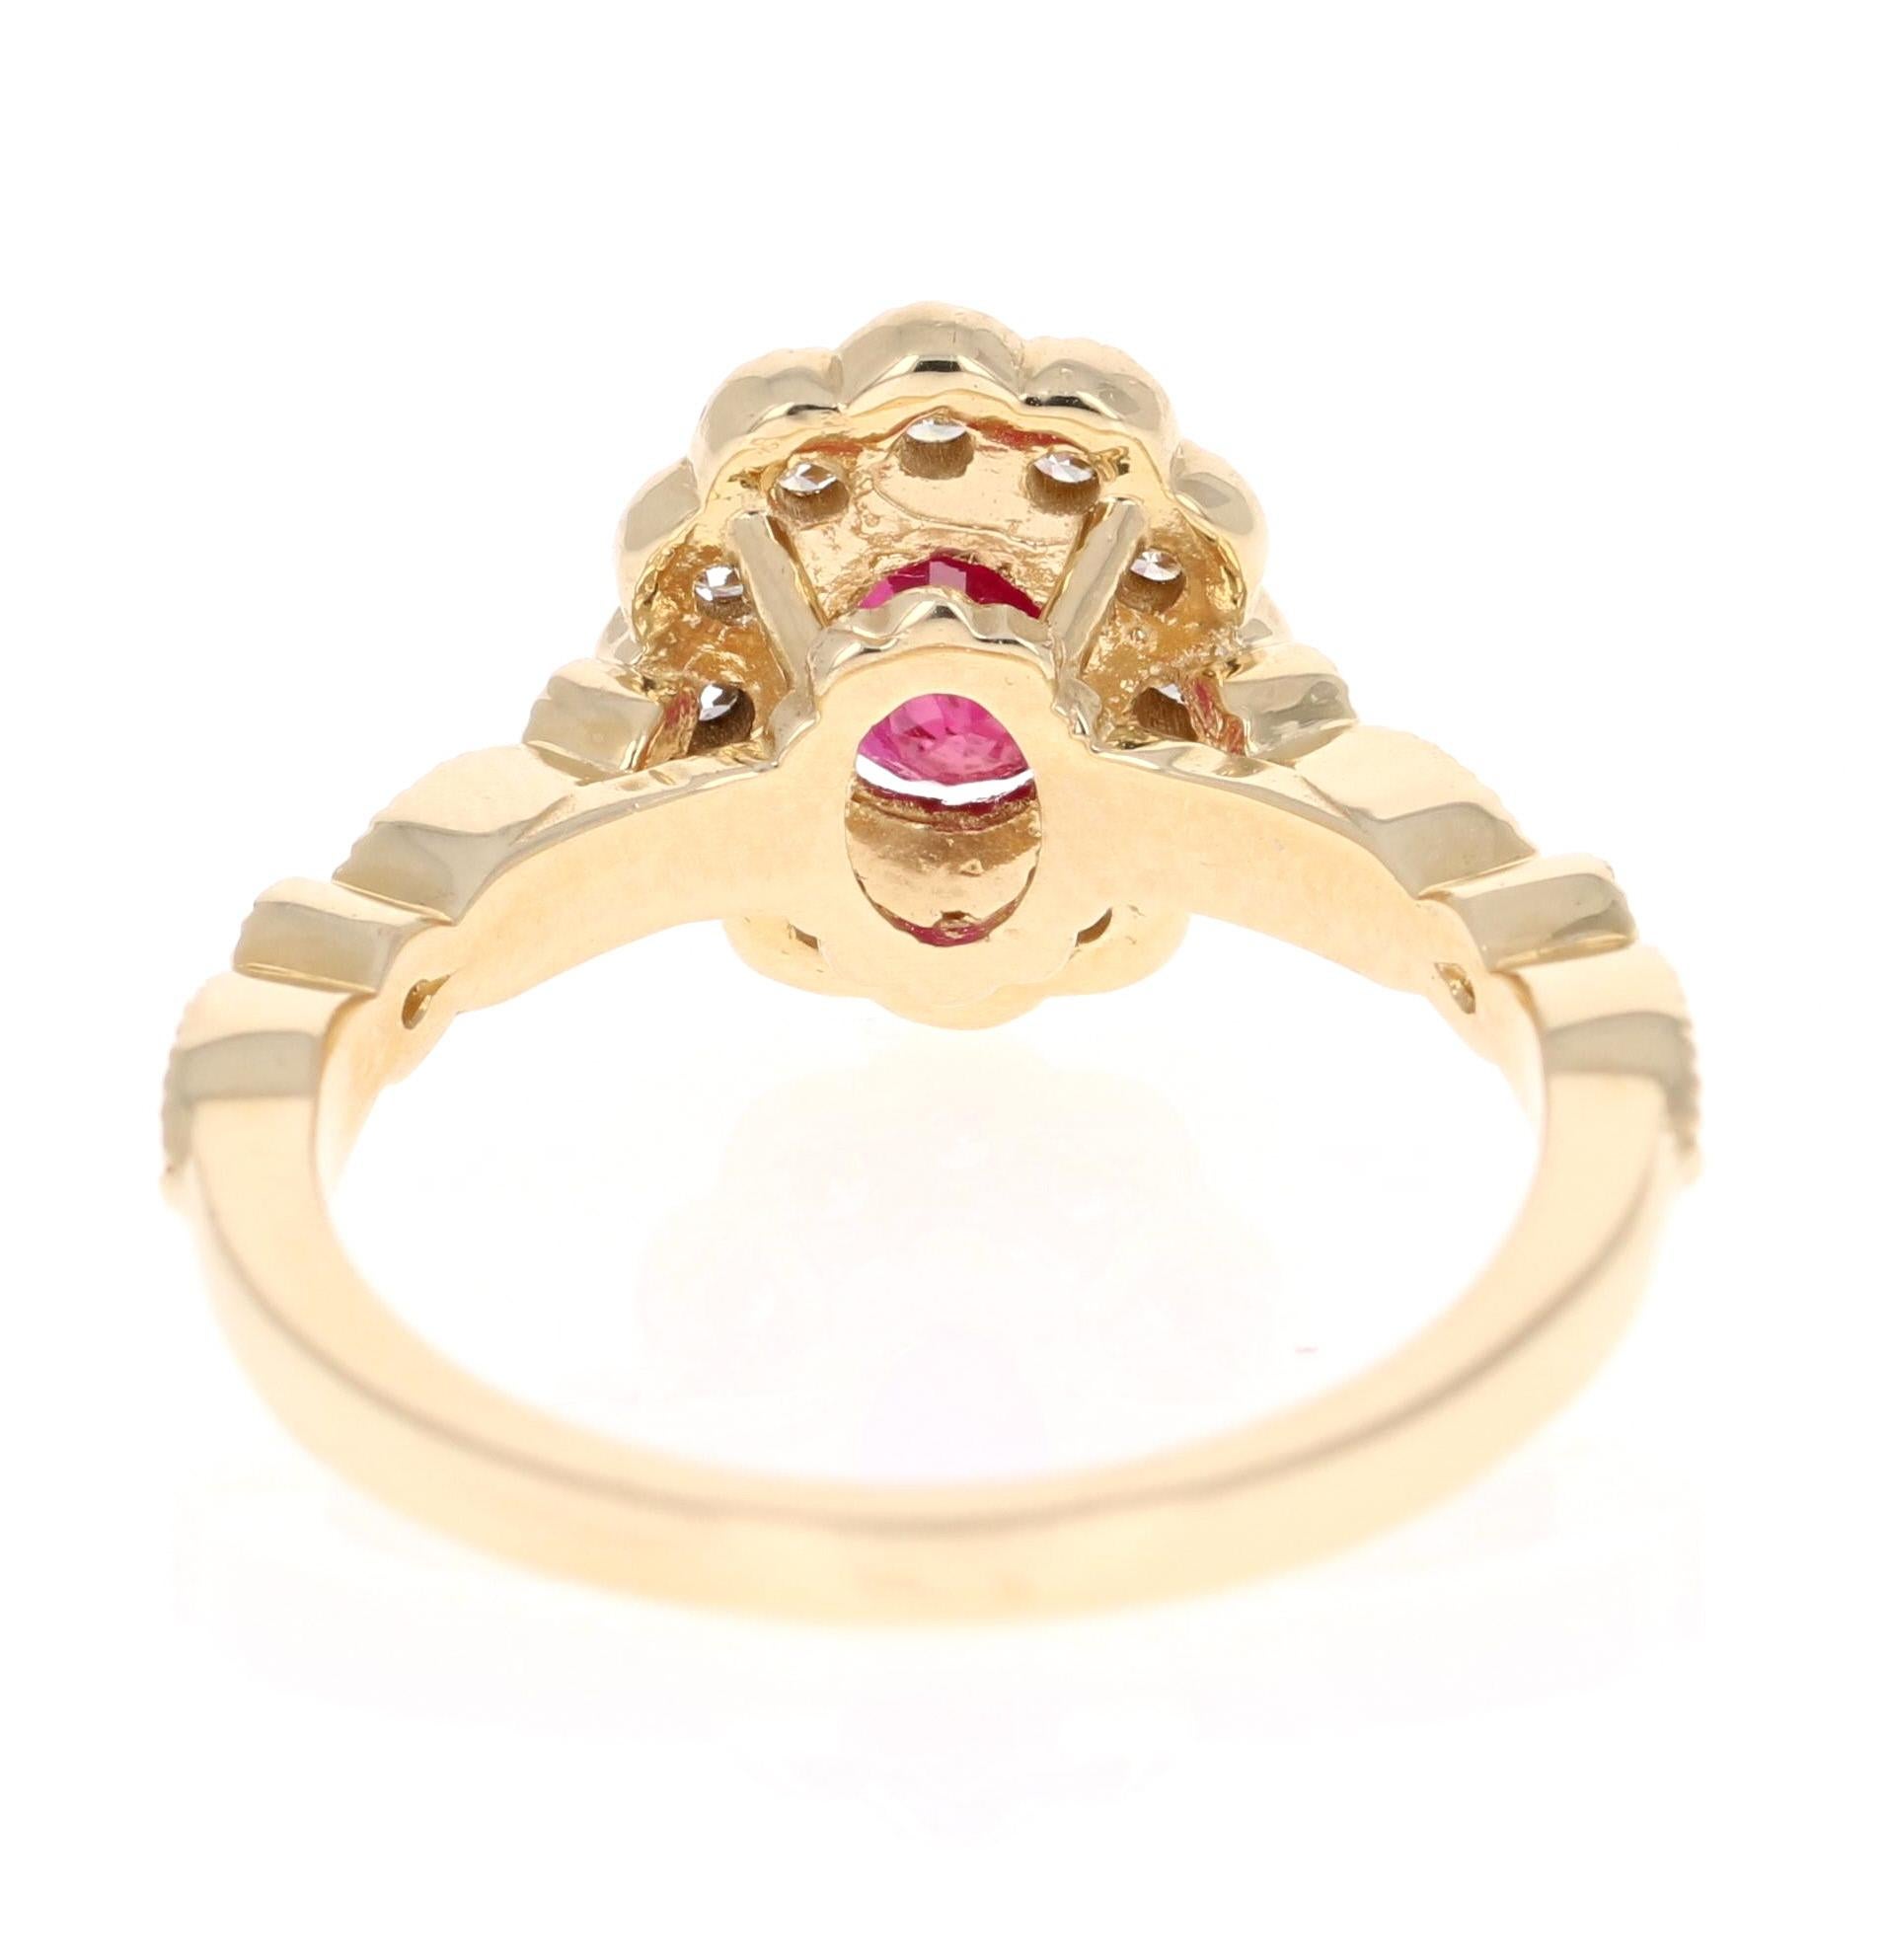 1.60 Carat Oval Cut Burmese Ruby Diamond 14 Karat Yellow Gold Bridal Ring In New Condition For Sale In Los Angeles, CA